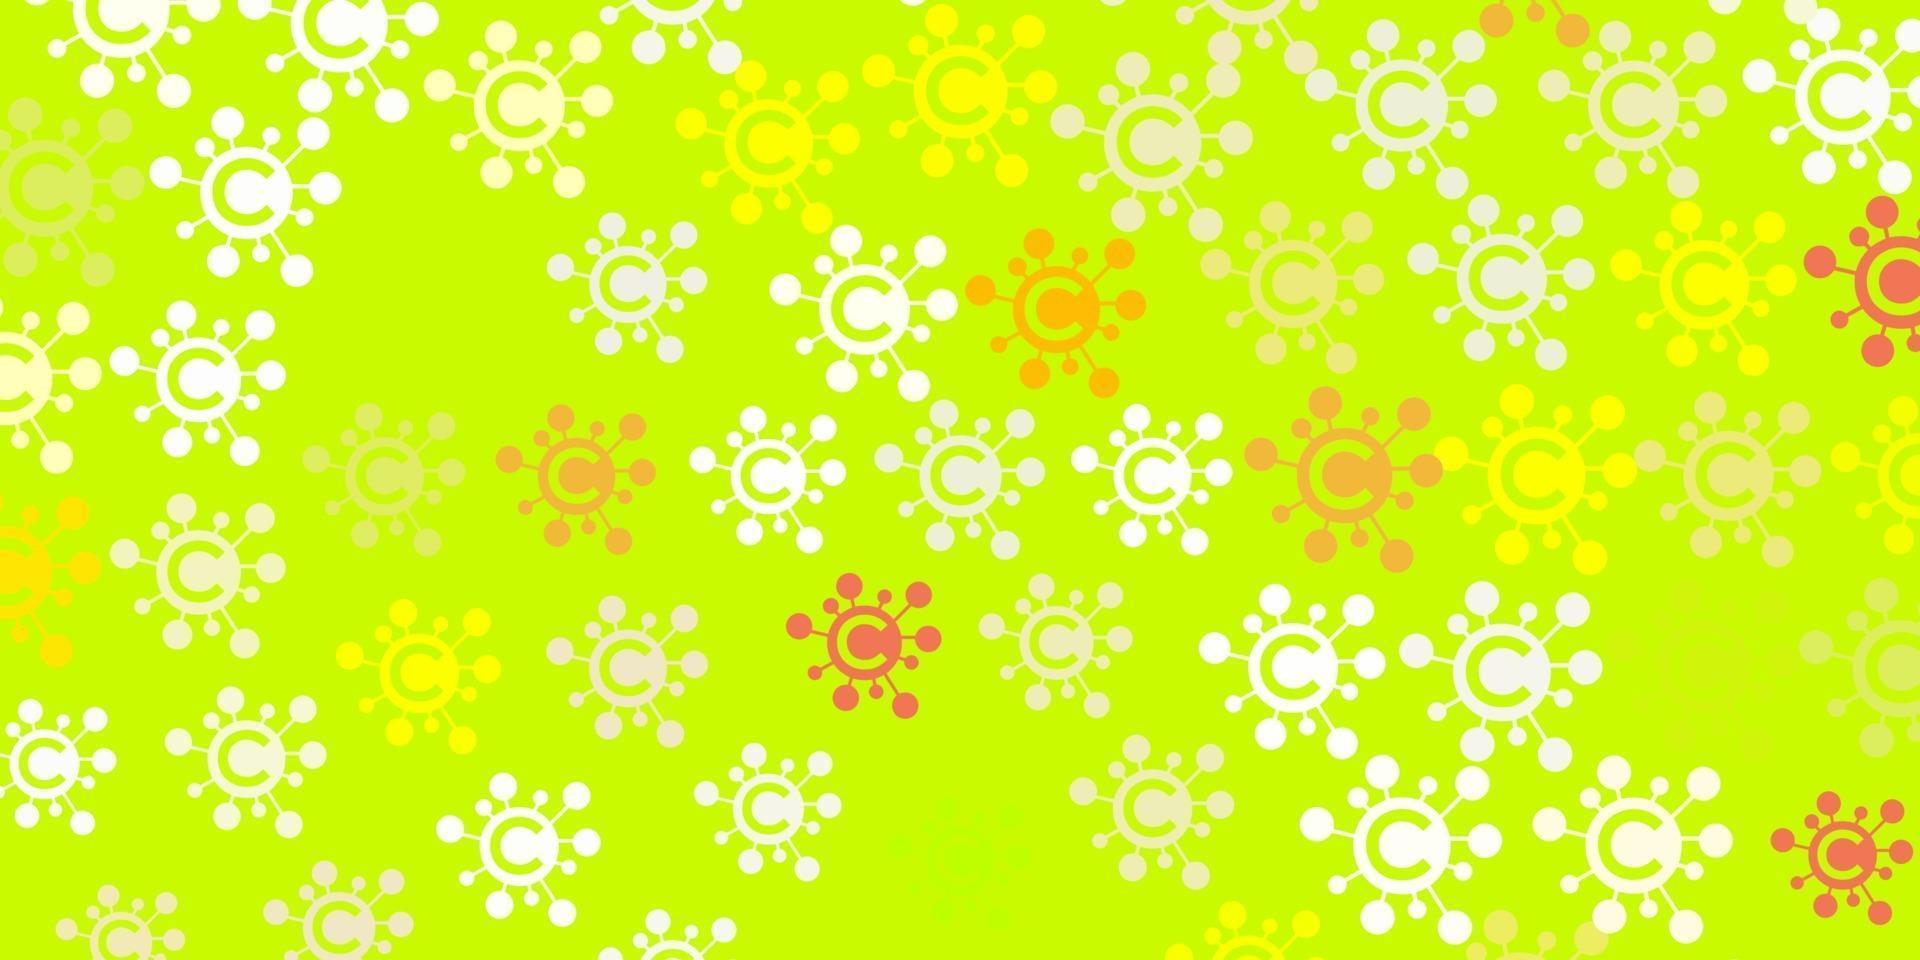 Light Green, Red vector texture with disease symbols.